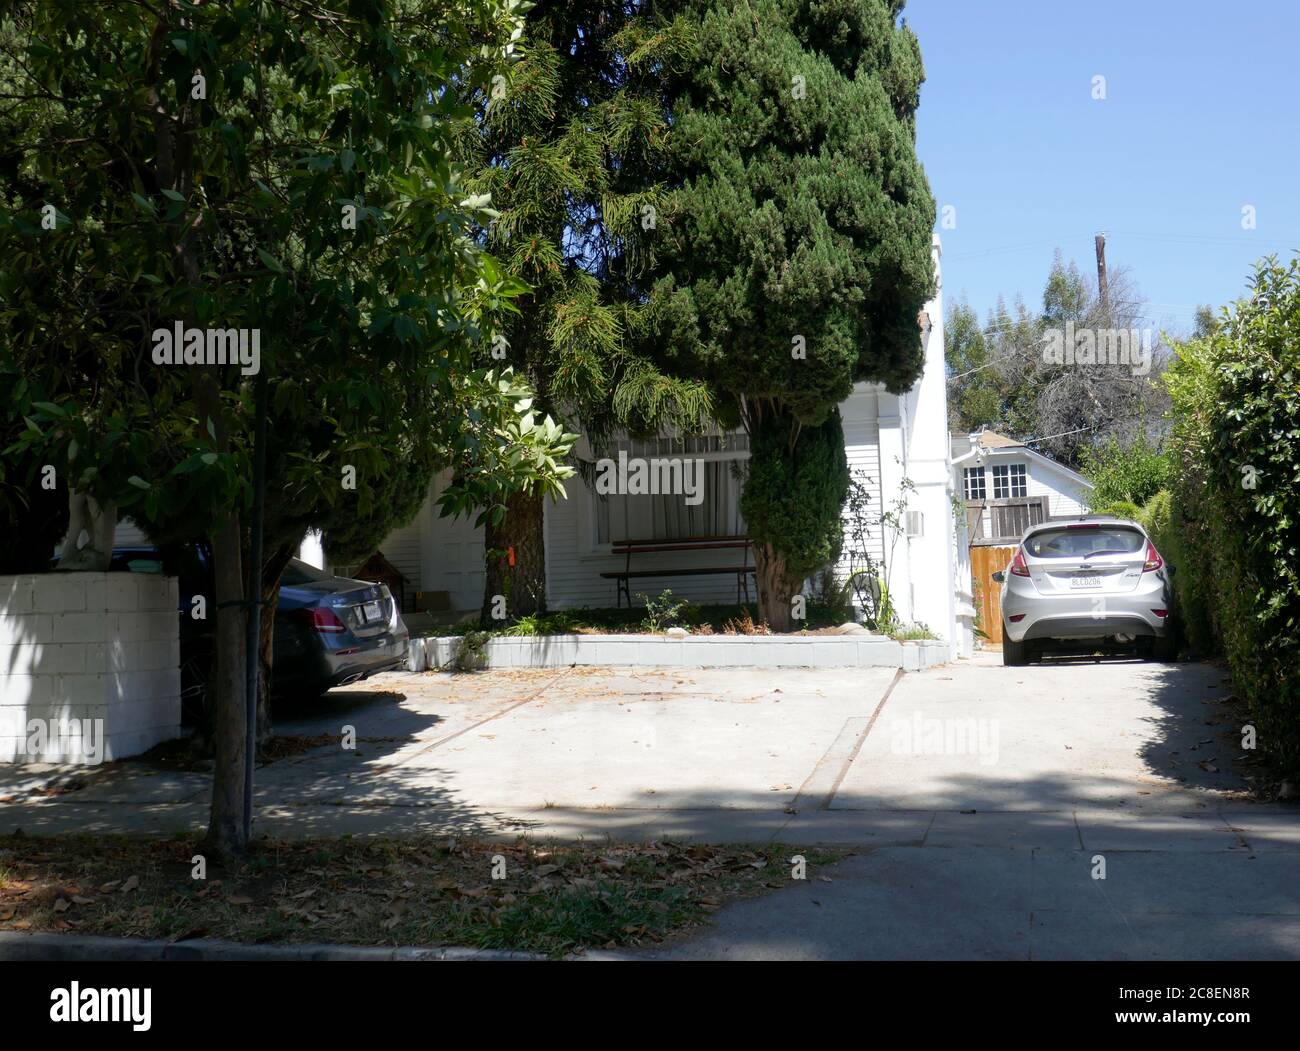 Los Angeles, California, USA 23rd July 2020 A general view of atmosphere of Charlie Chaplin Jr.'s Home, his last residence where he died, on July 23, 2020 at 1408 N. Ogden Drive in Los Angeles, California, USA. Photo by Barry King/Alamy Stock Photo Stock Photo